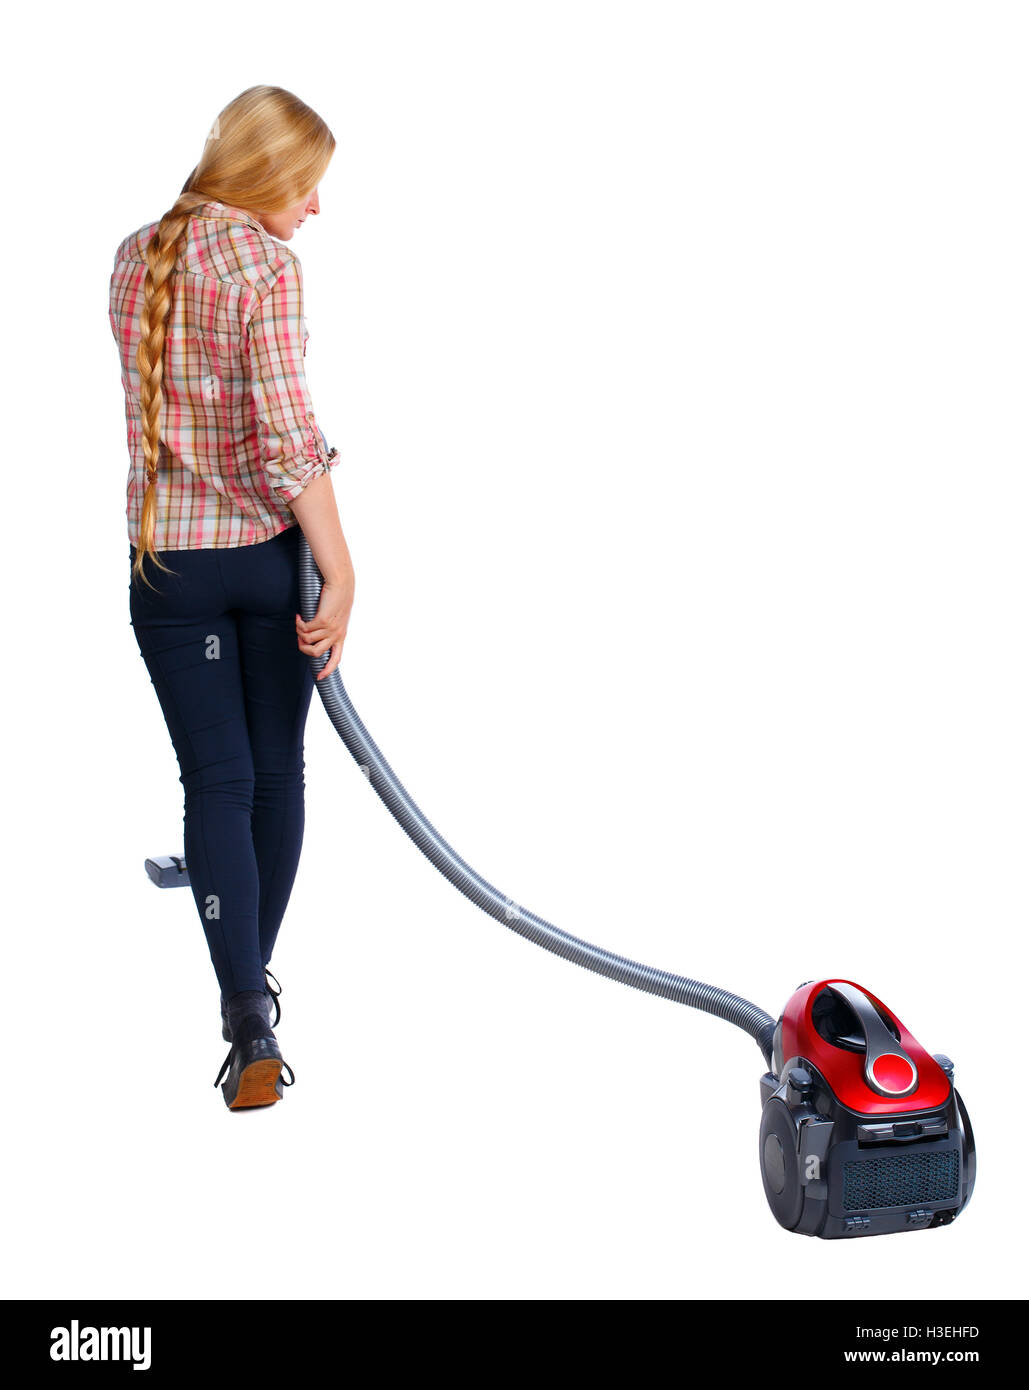 Rear view of a woman with a vacuum cleaner. She is busy cleaning. Rear view people collection. backside view of person. Isolated over white background. Long-haired blonde vacuums. Stock Photo